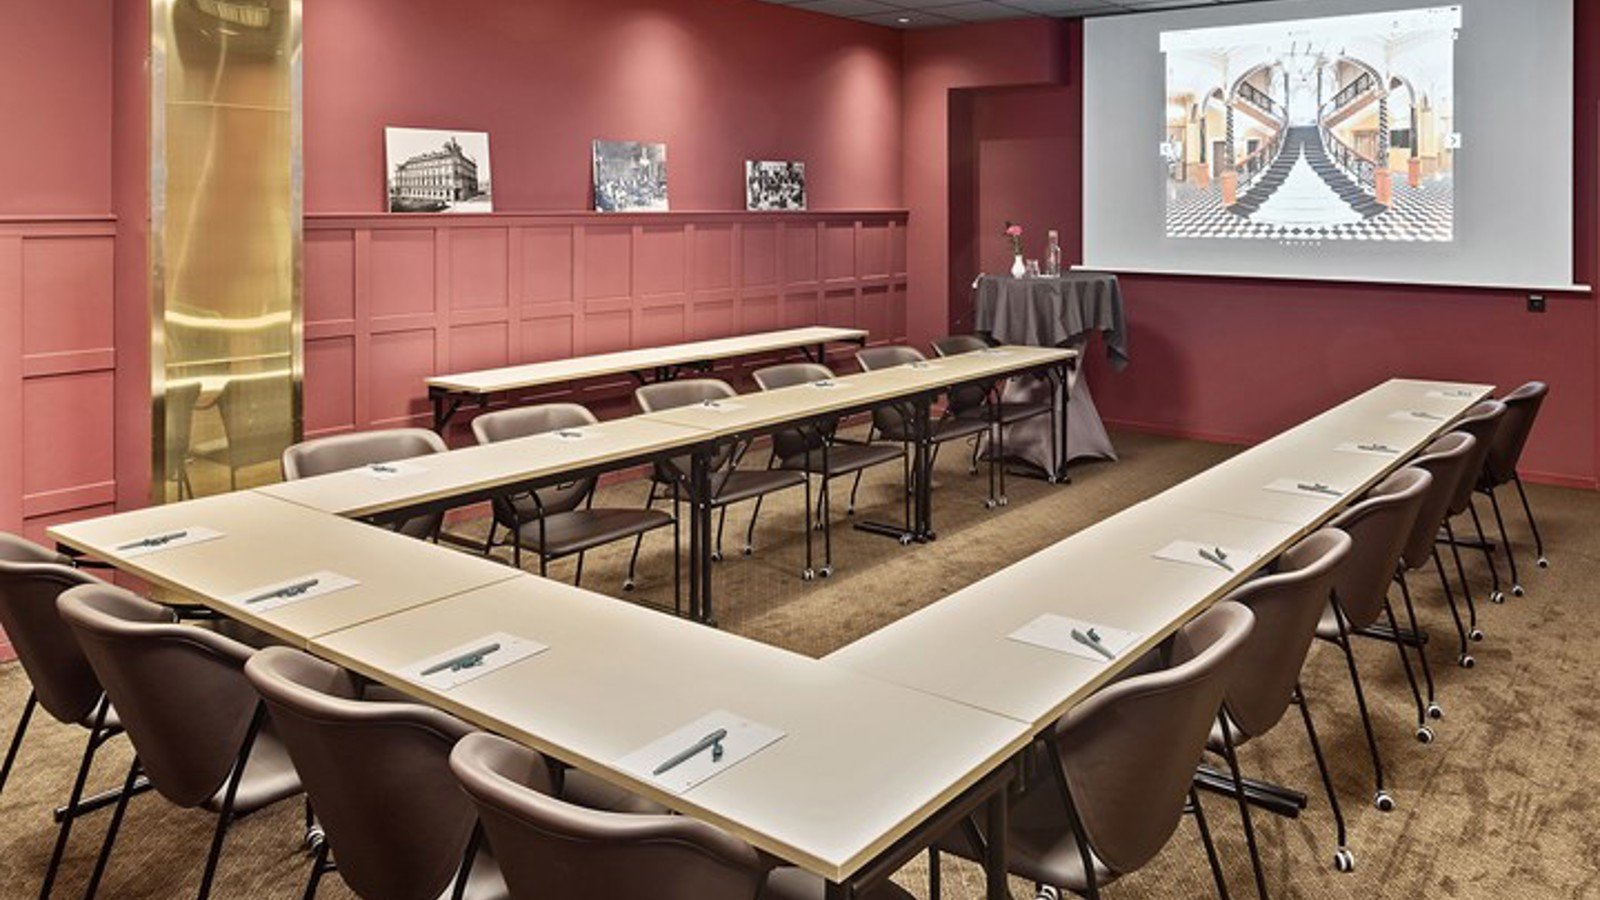 Conference room with U-shaped seating and red walls